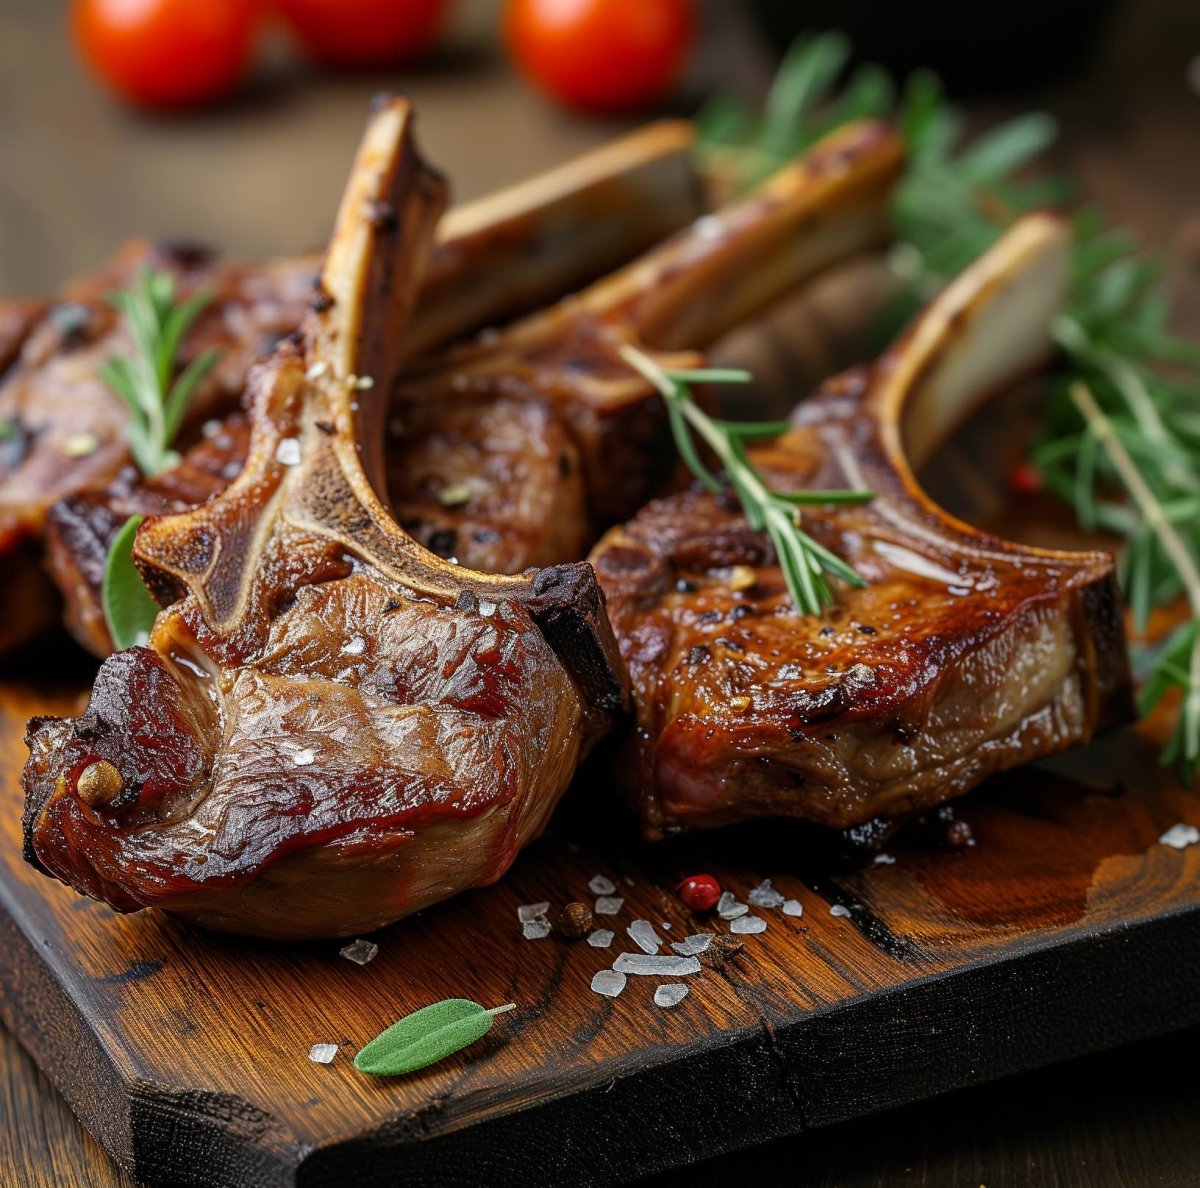 Pairing The Best Wine With Grilled Lamb Chops - Corkframes.com